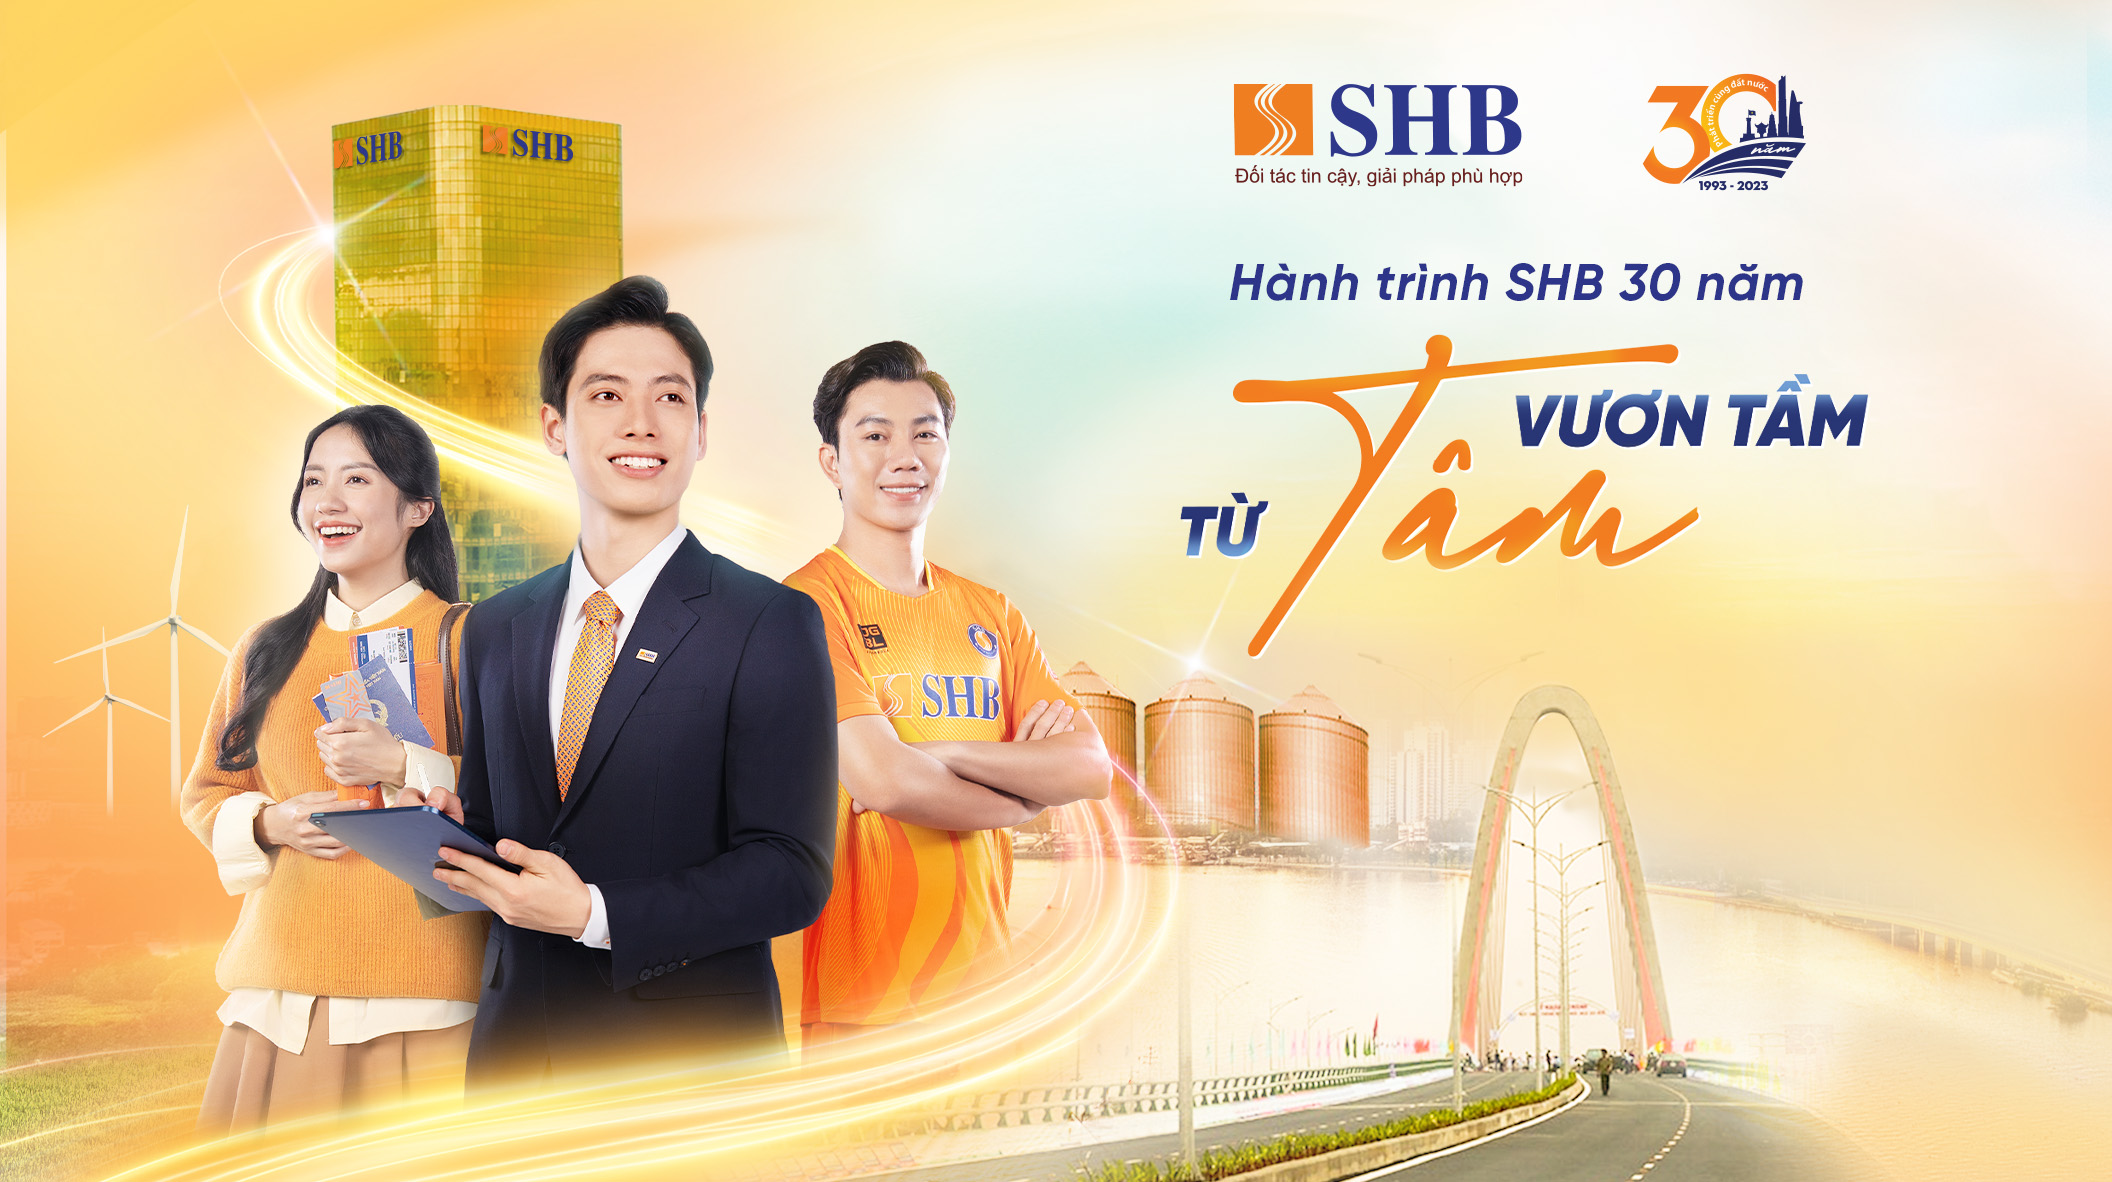 SHB’s 30-Year journey: From Heart to Greater Heights